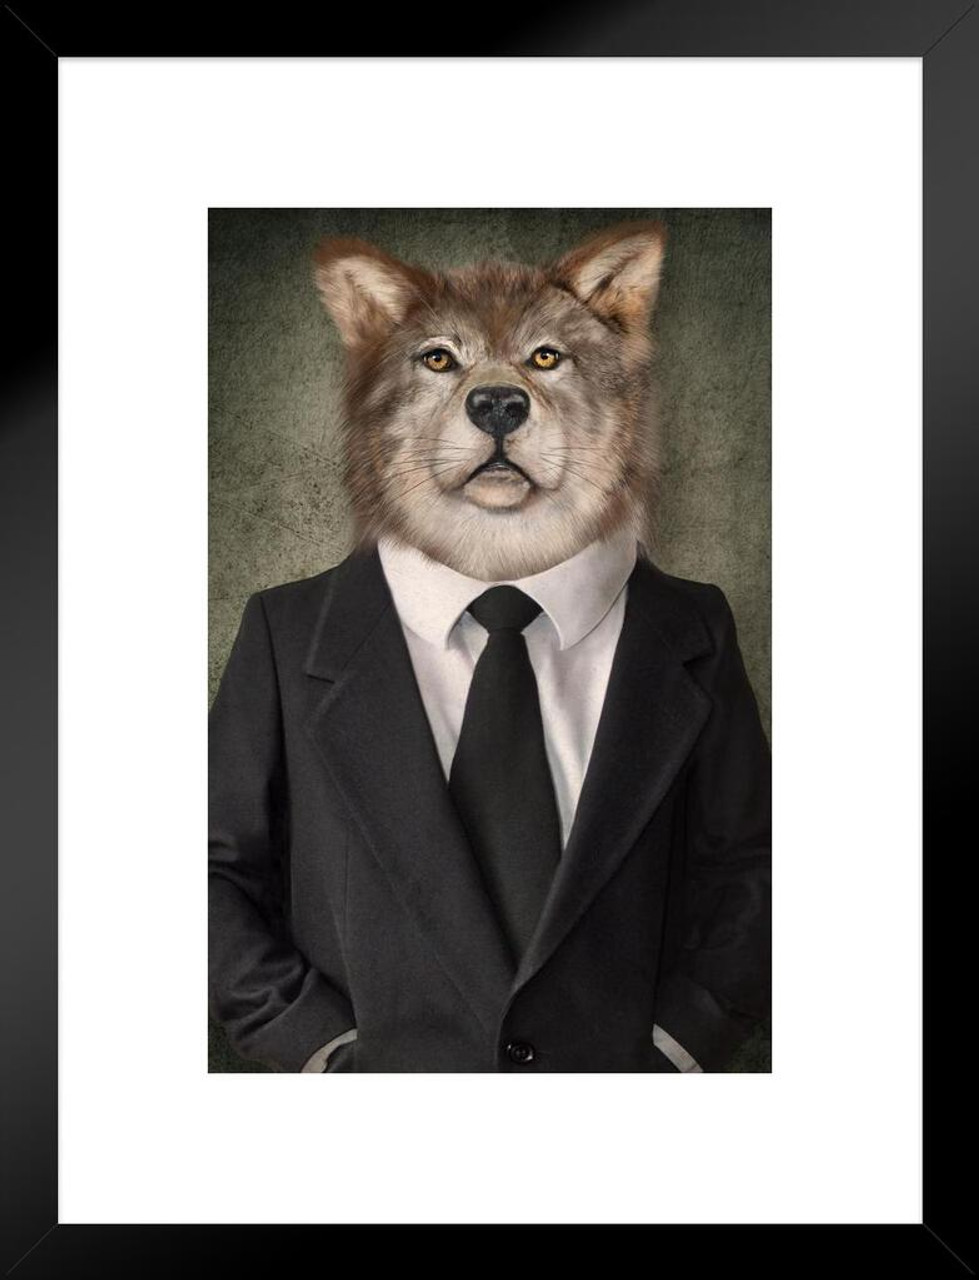 Wolf In Business Suit Head Wearing Human Clothes Funny Parody Animal Art  Photo Matted Framed Wall Decor Art Print 20x26